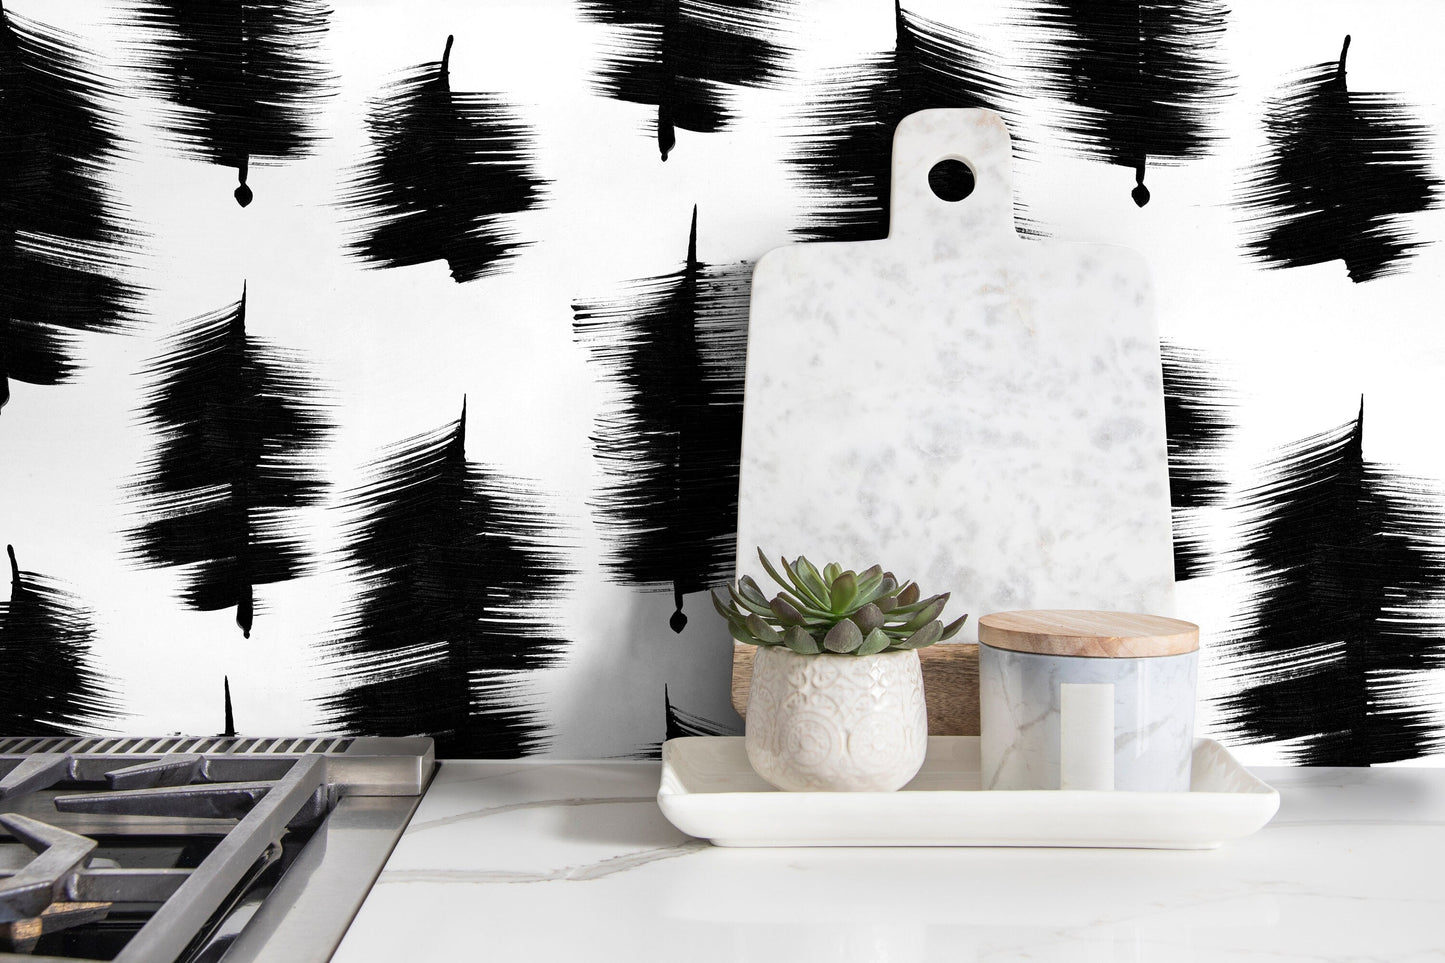 Black and White Abstract Wallpaper / Peel and Stick Wallpaper Removable Wallpaper Home Decor Wall Art Wall Decor Room Decor - C885